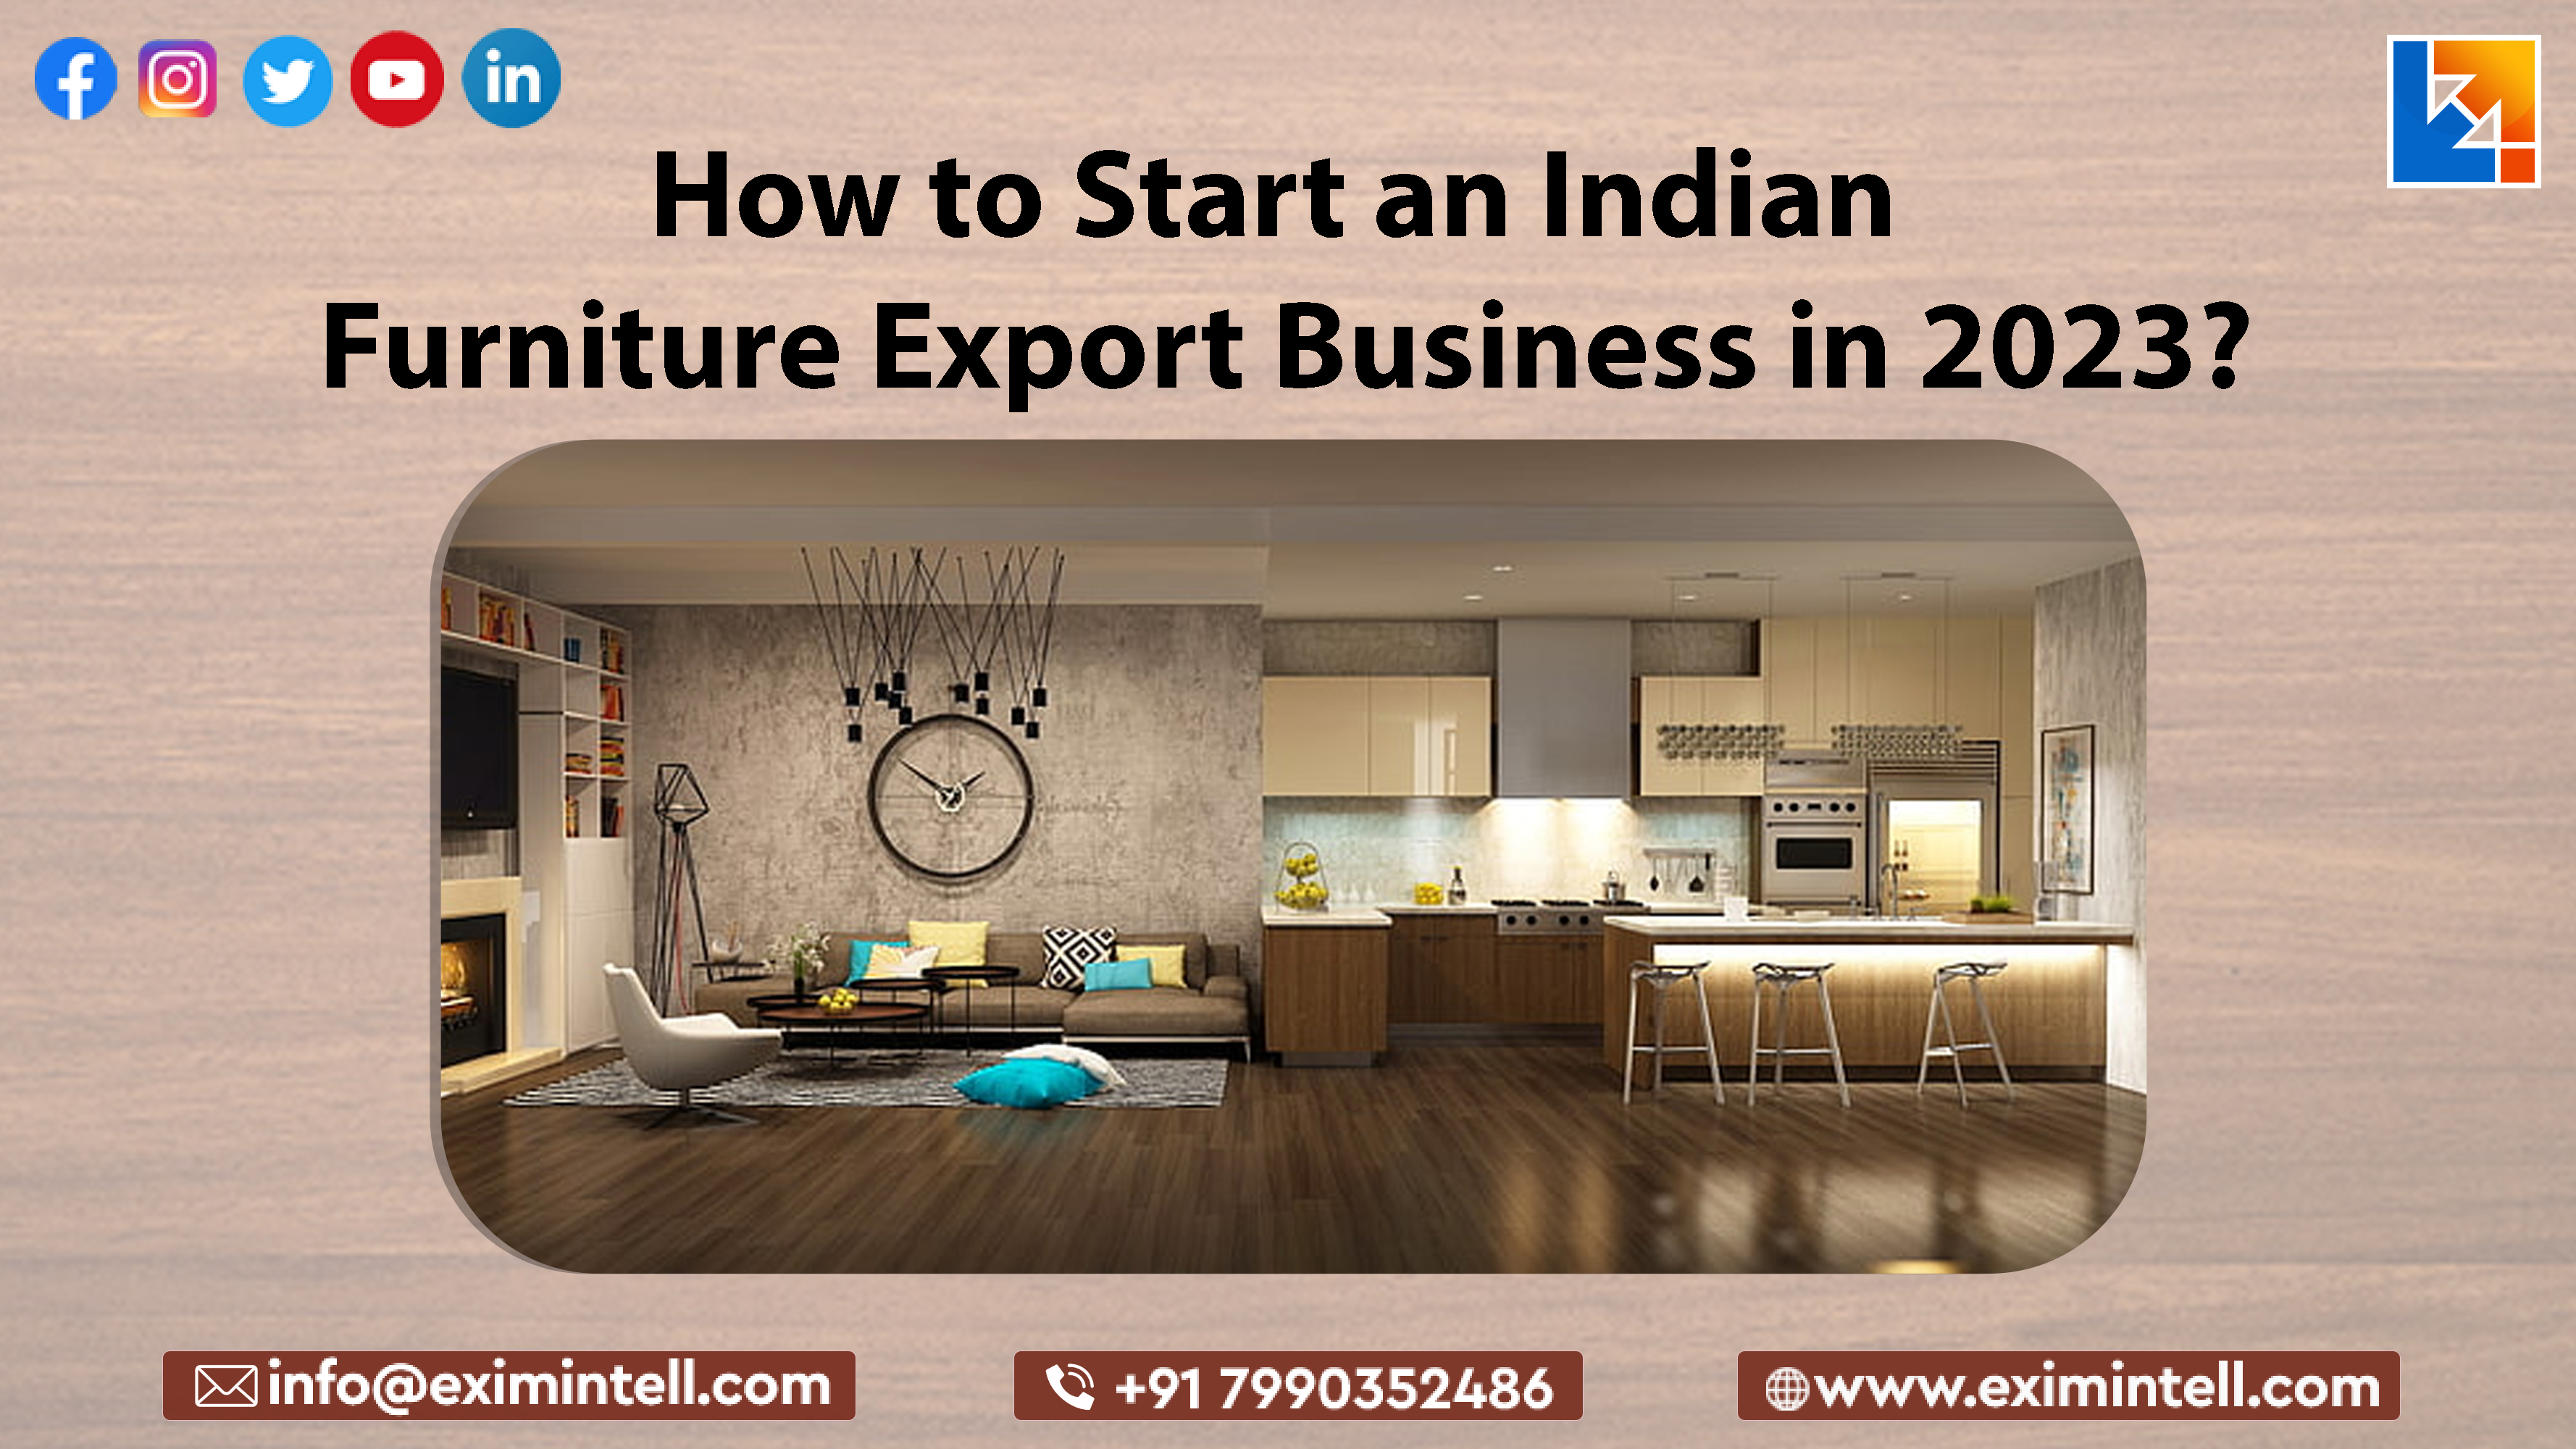 How to start an Indian Furniture Export Business in 2023?